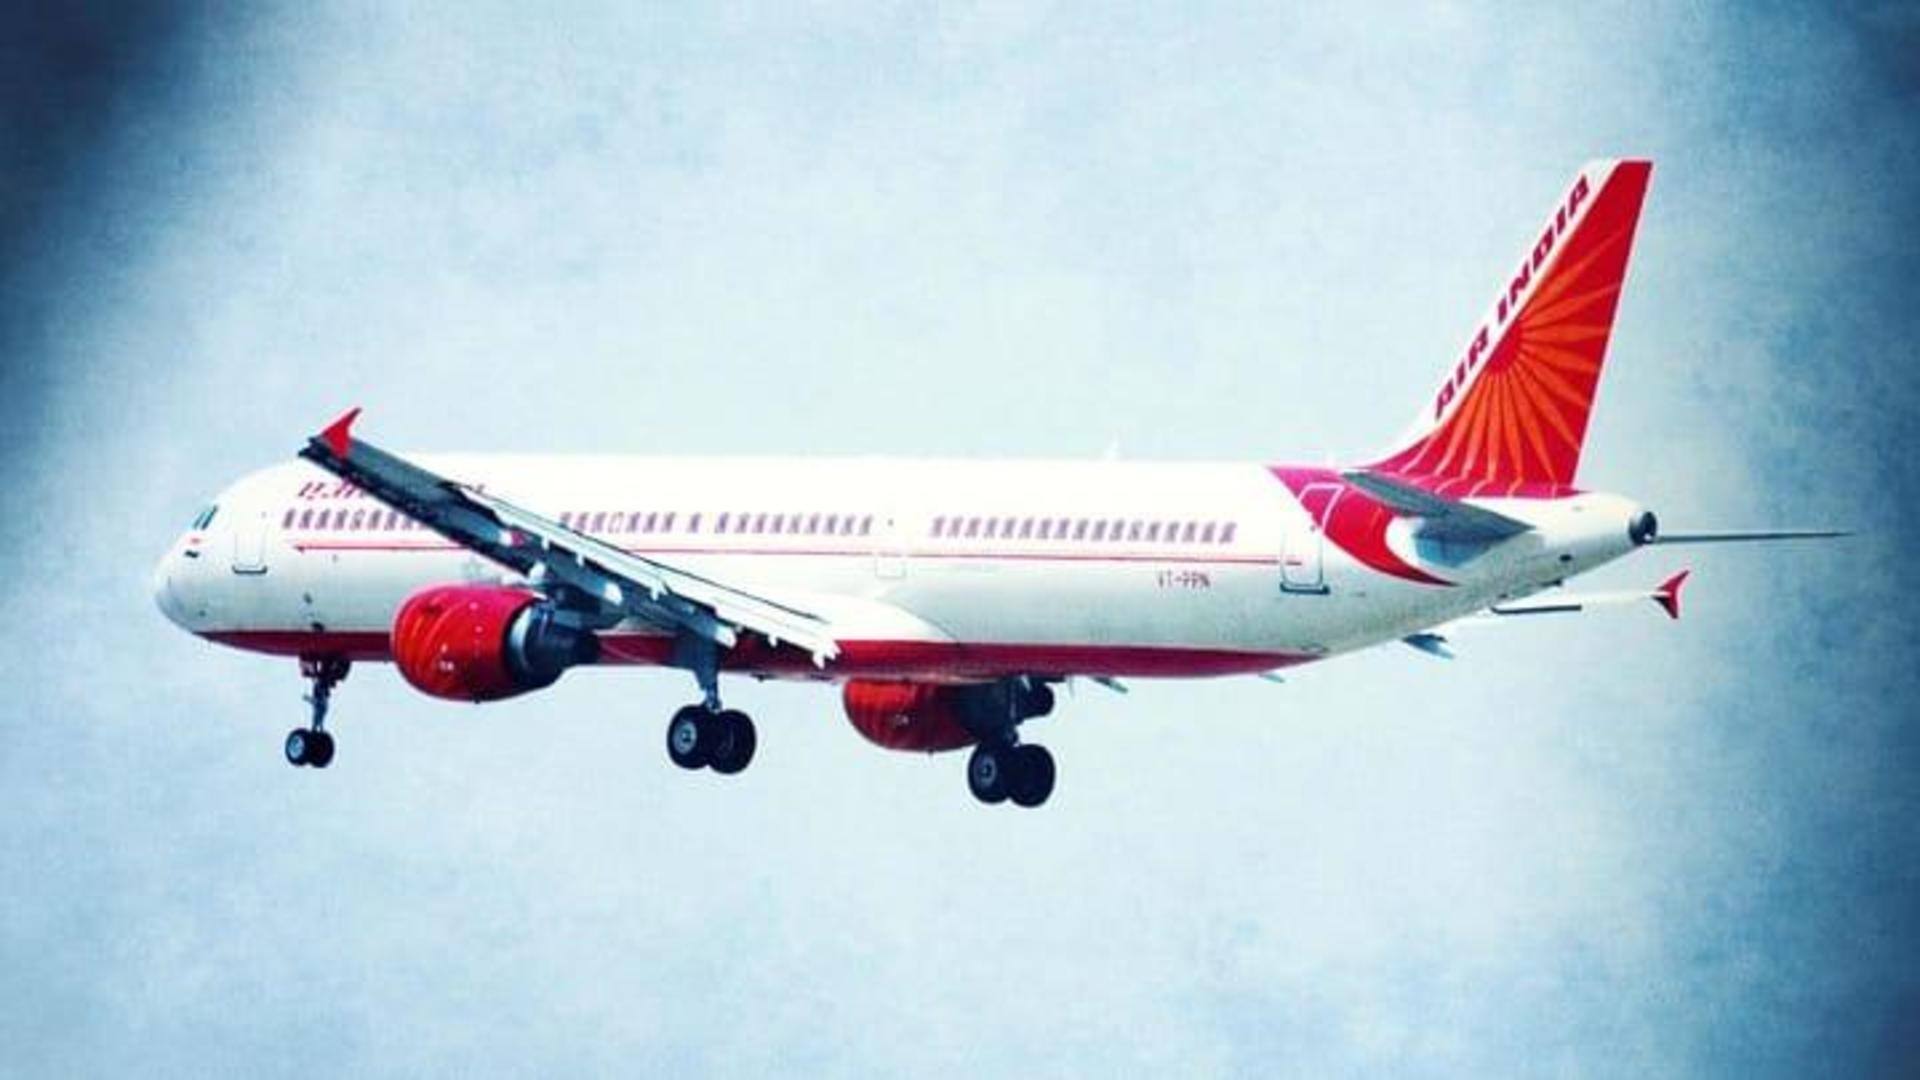 Will refund fare: Air India to passengers who were stranded